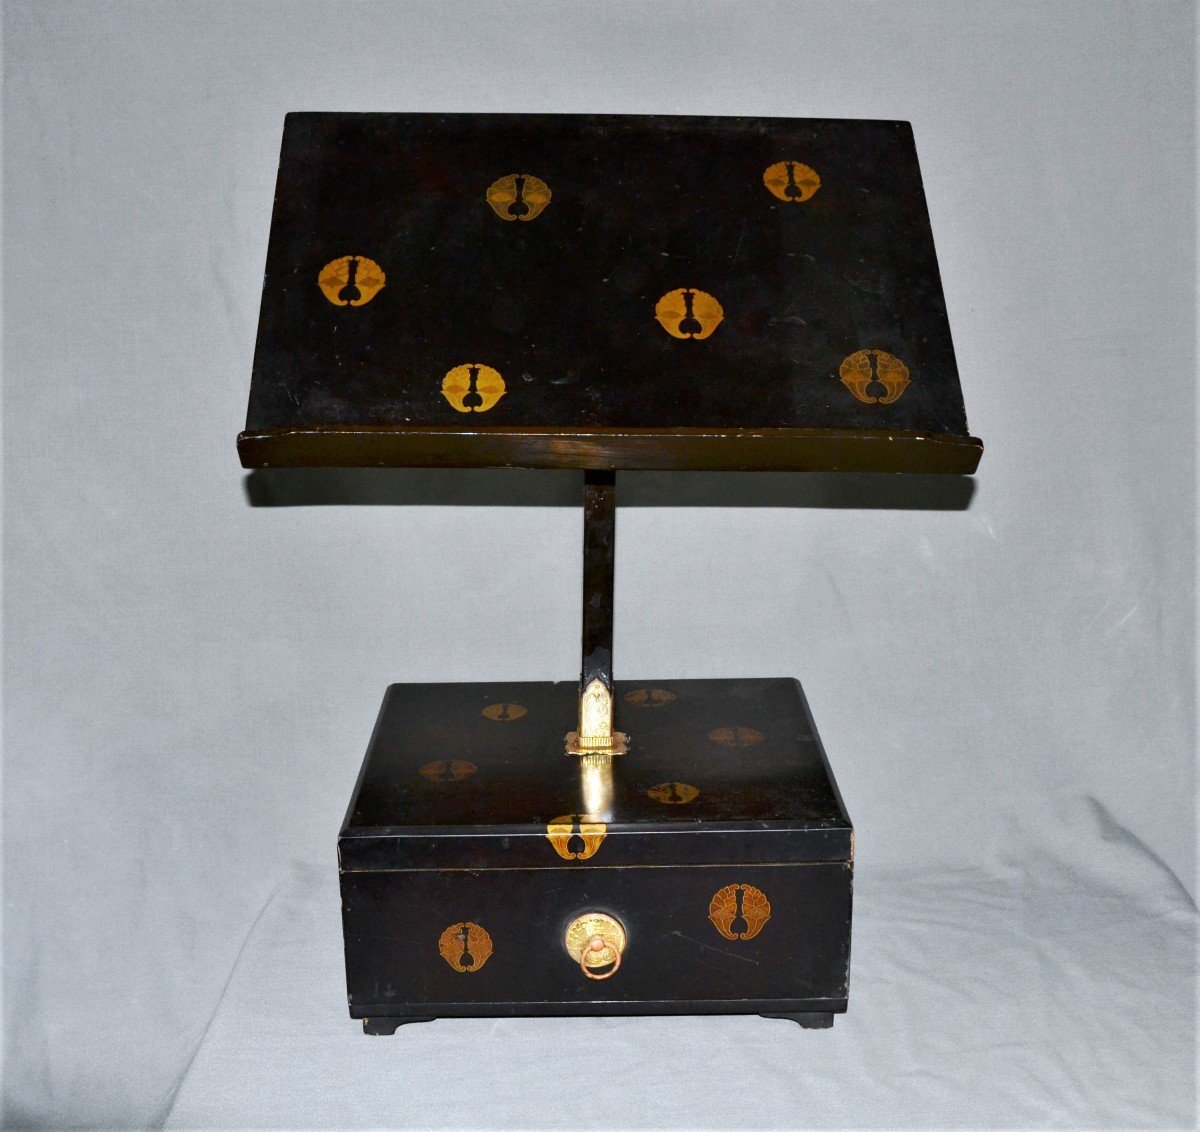 Lectern In Black Lacquer Powdered With Gold. Decor Of "my". Japan Edo Period 18th Century.-photo-2